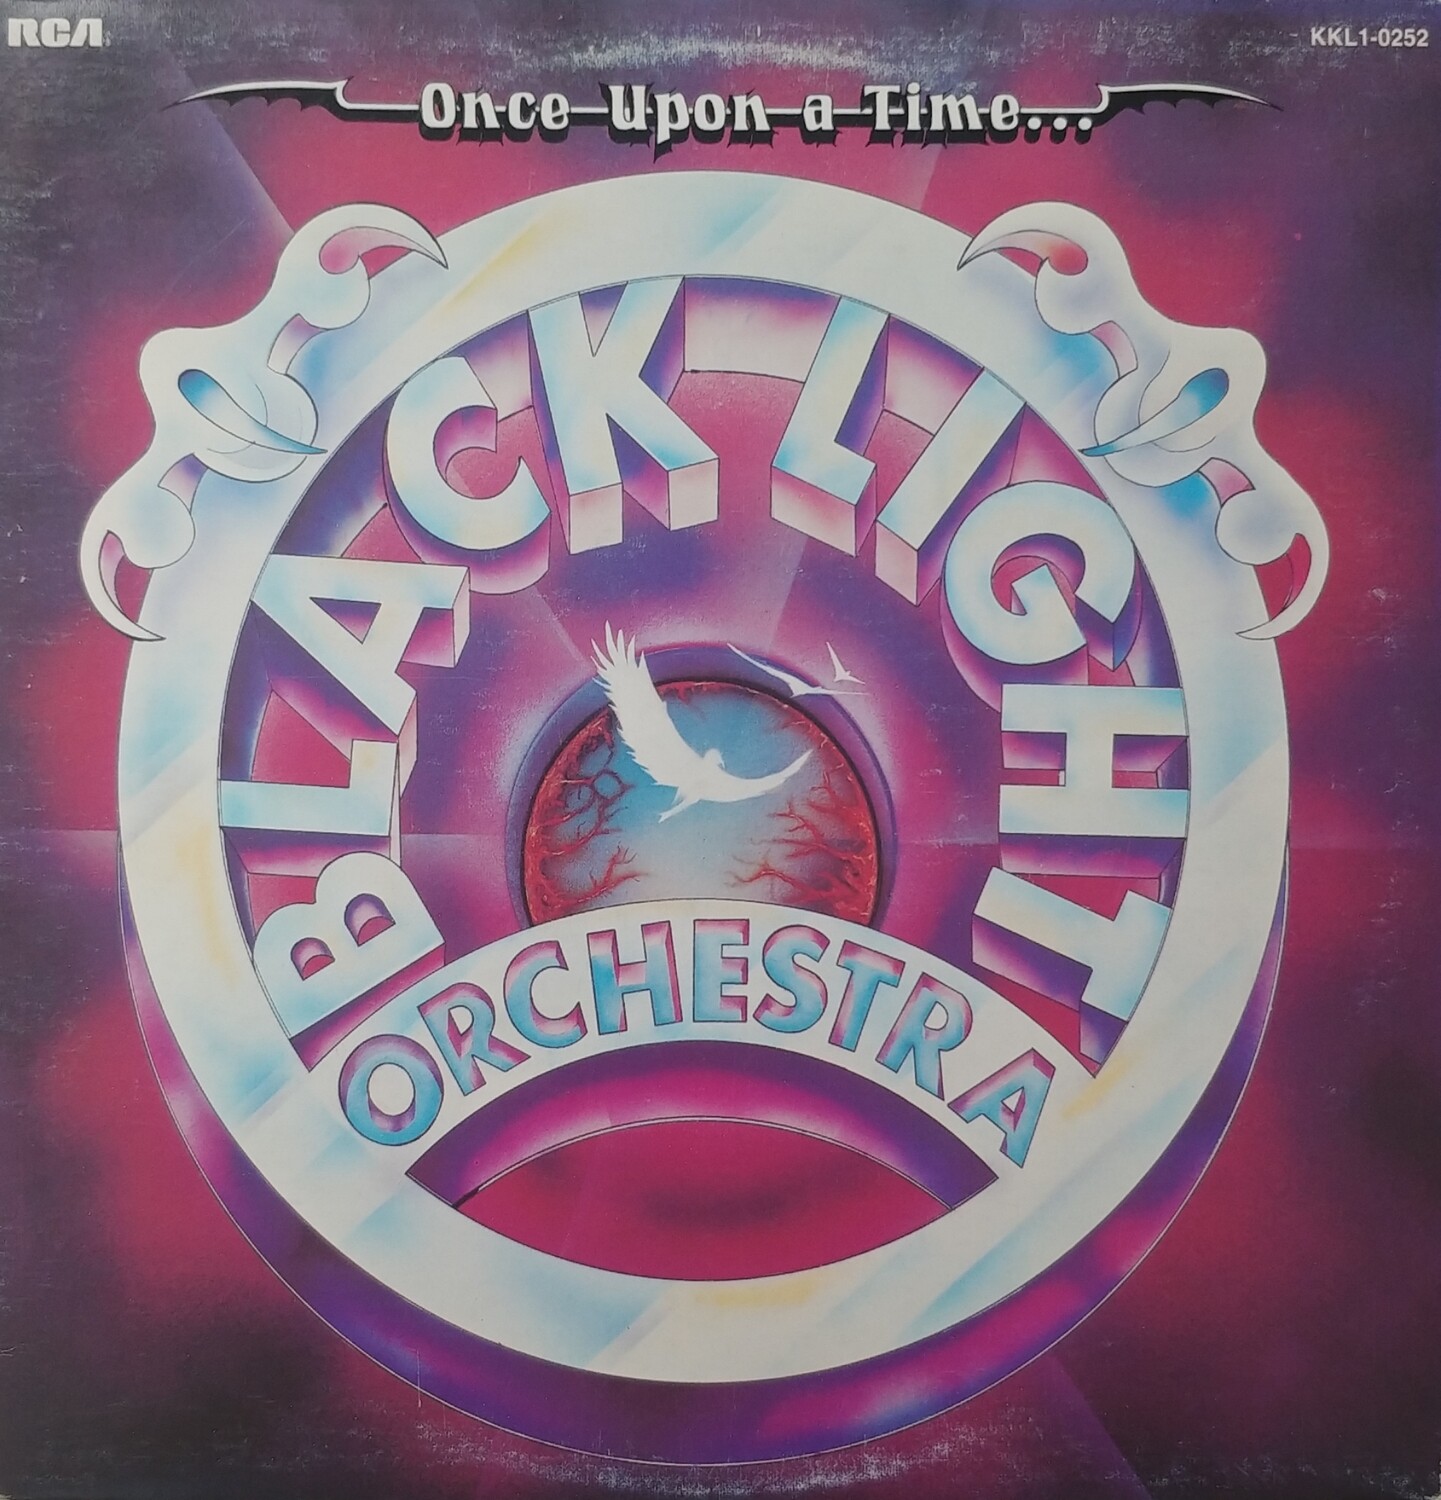 Black Light Orchestra - Once upon a Time